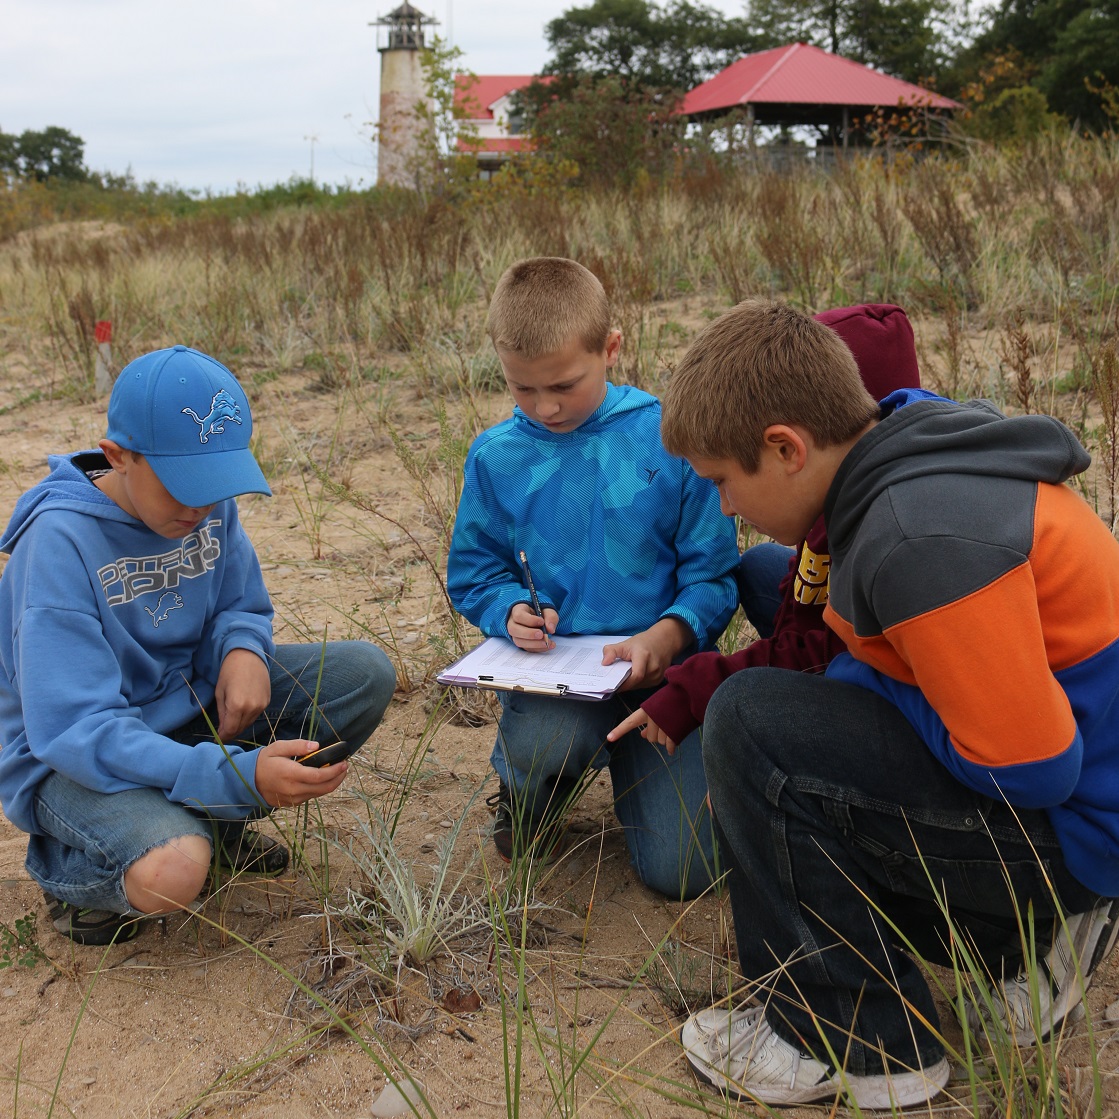 Students use tablets and GPS units while working with Michigan Sea Grant and Michigan Natural Features Inventory ecologists to map federally threatened species in coastal dune environments on Charity Island.